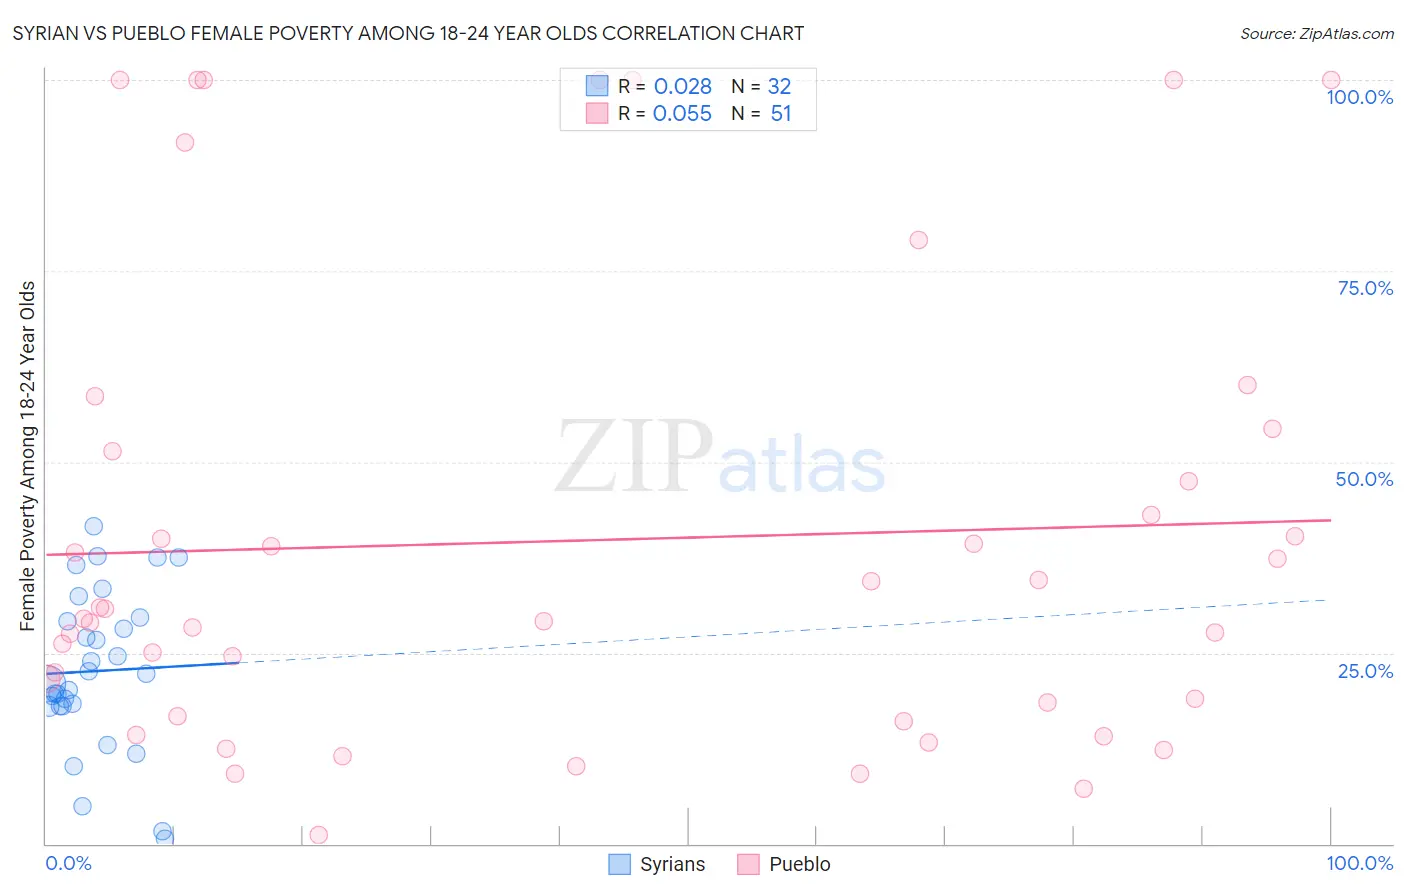 Syrian vs Pueblo Female Poverty Among 18-24 Year Olds